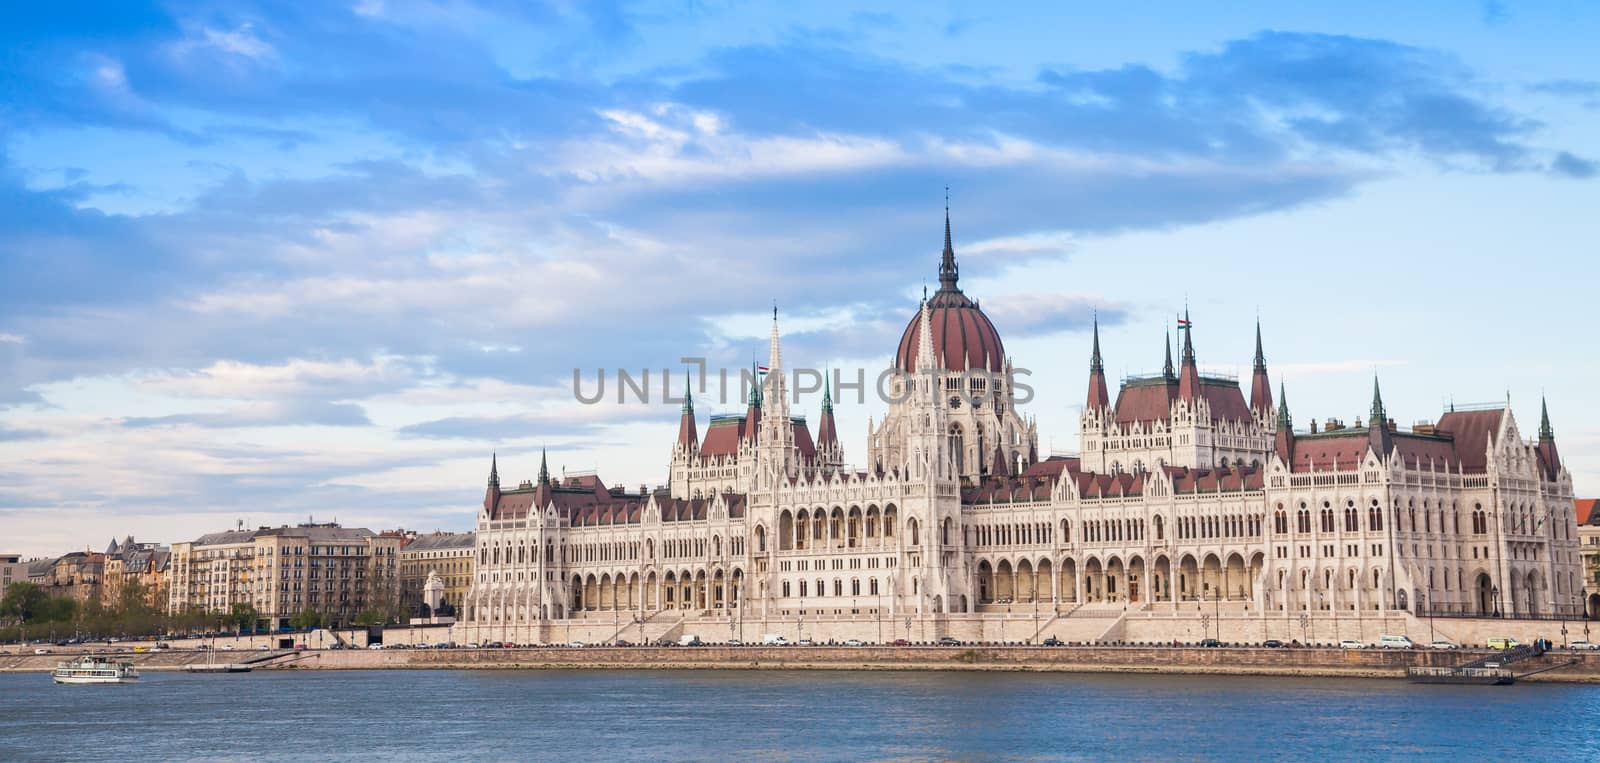 The Hungarian Parliament Building, a notable landmark of Hungary and a popular tourist destination of Budapest.